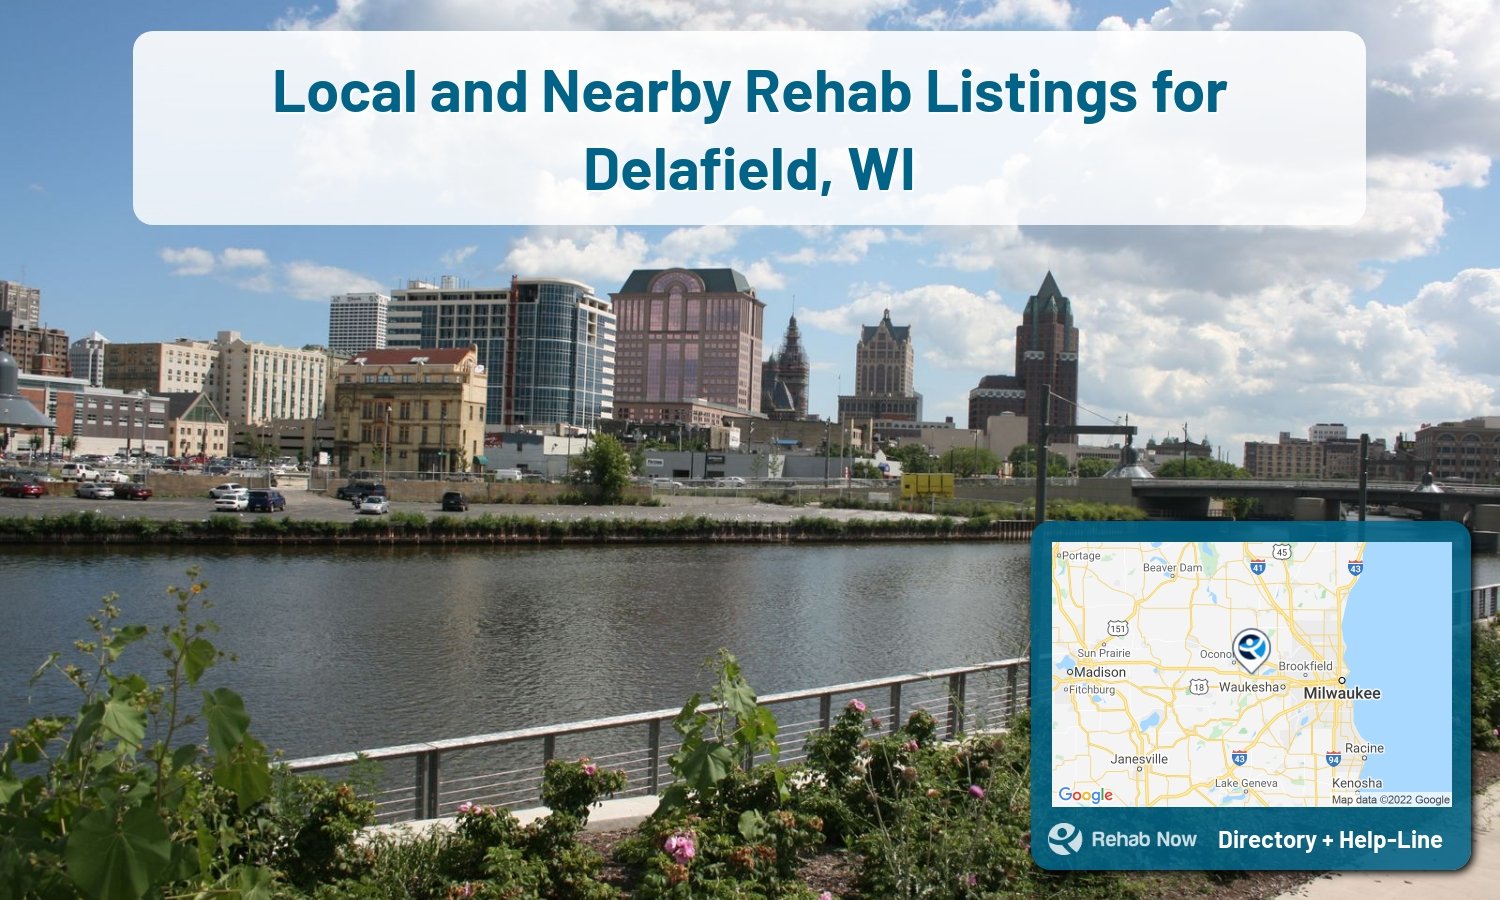 Delafield, WI Treatment Centers. Find drug rehab in Delafield, Wisconsin, or detox and treatment programs. Get the right help now!